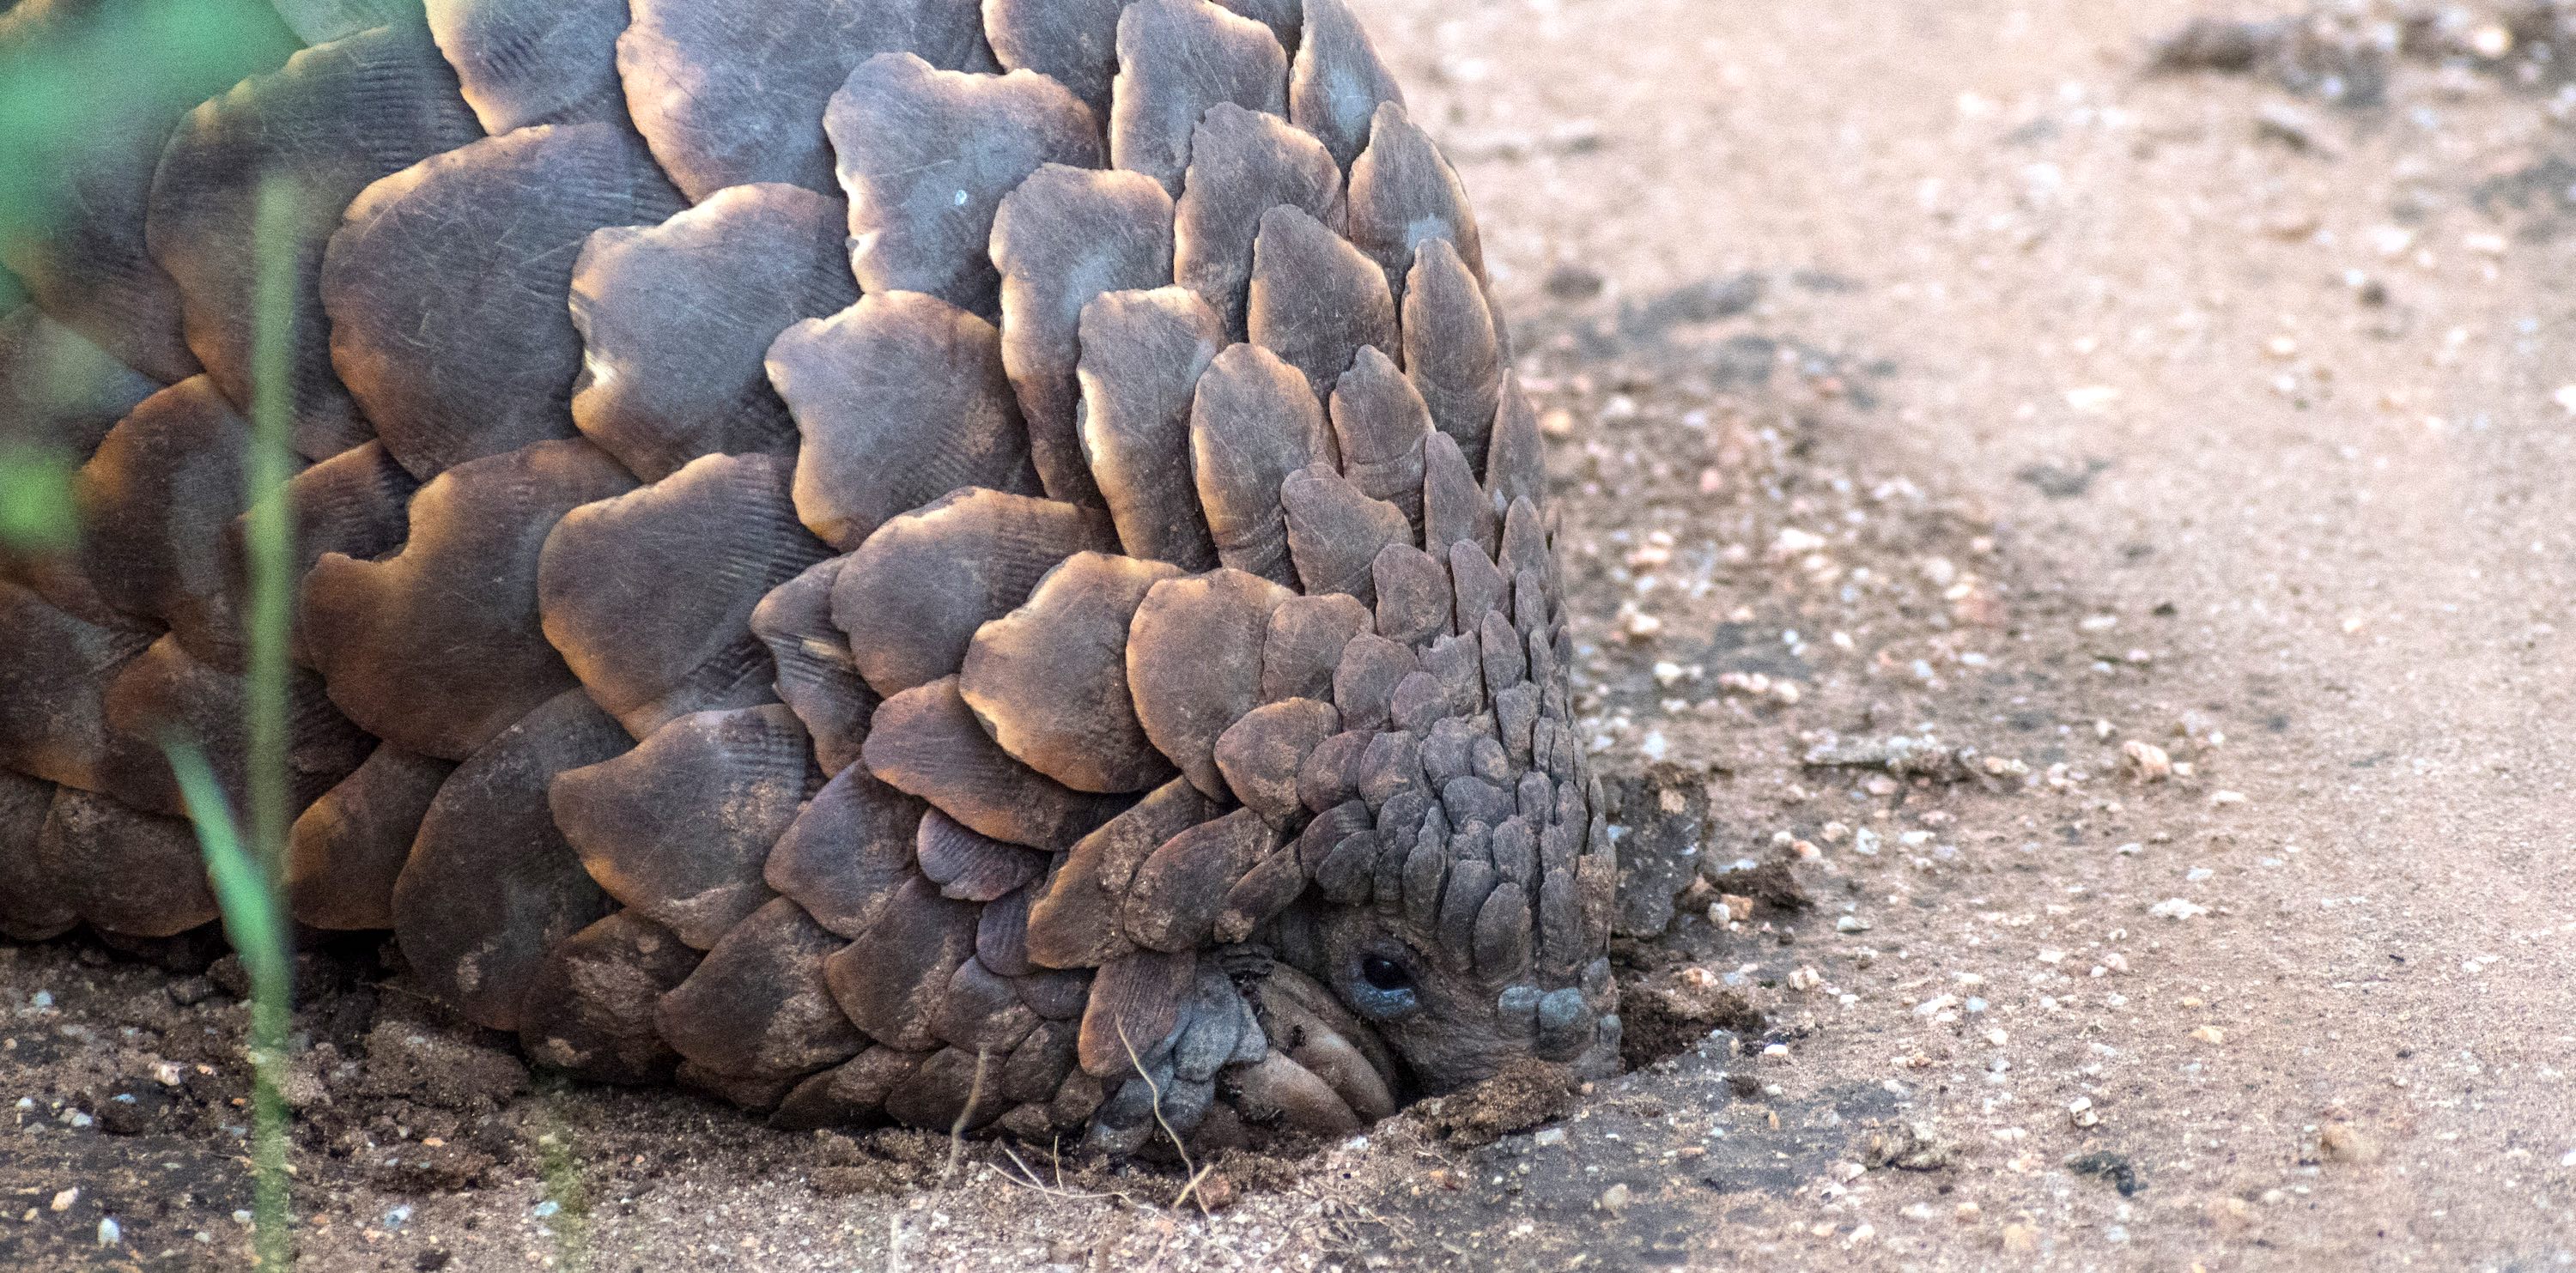 A pangolin digging into the earth.